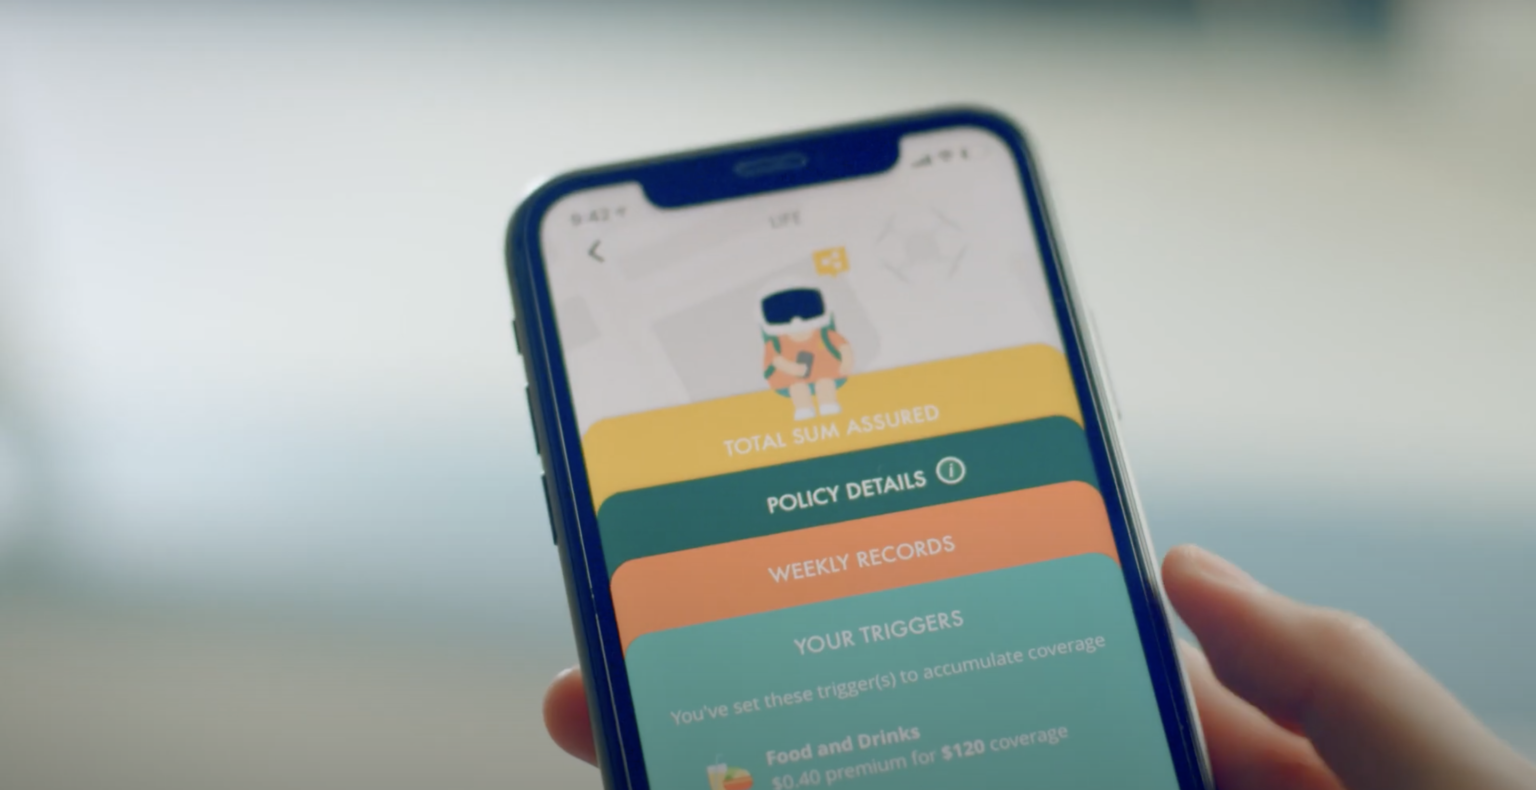 Introducing Millenials to Insurance Through A Unique Mobile Experience